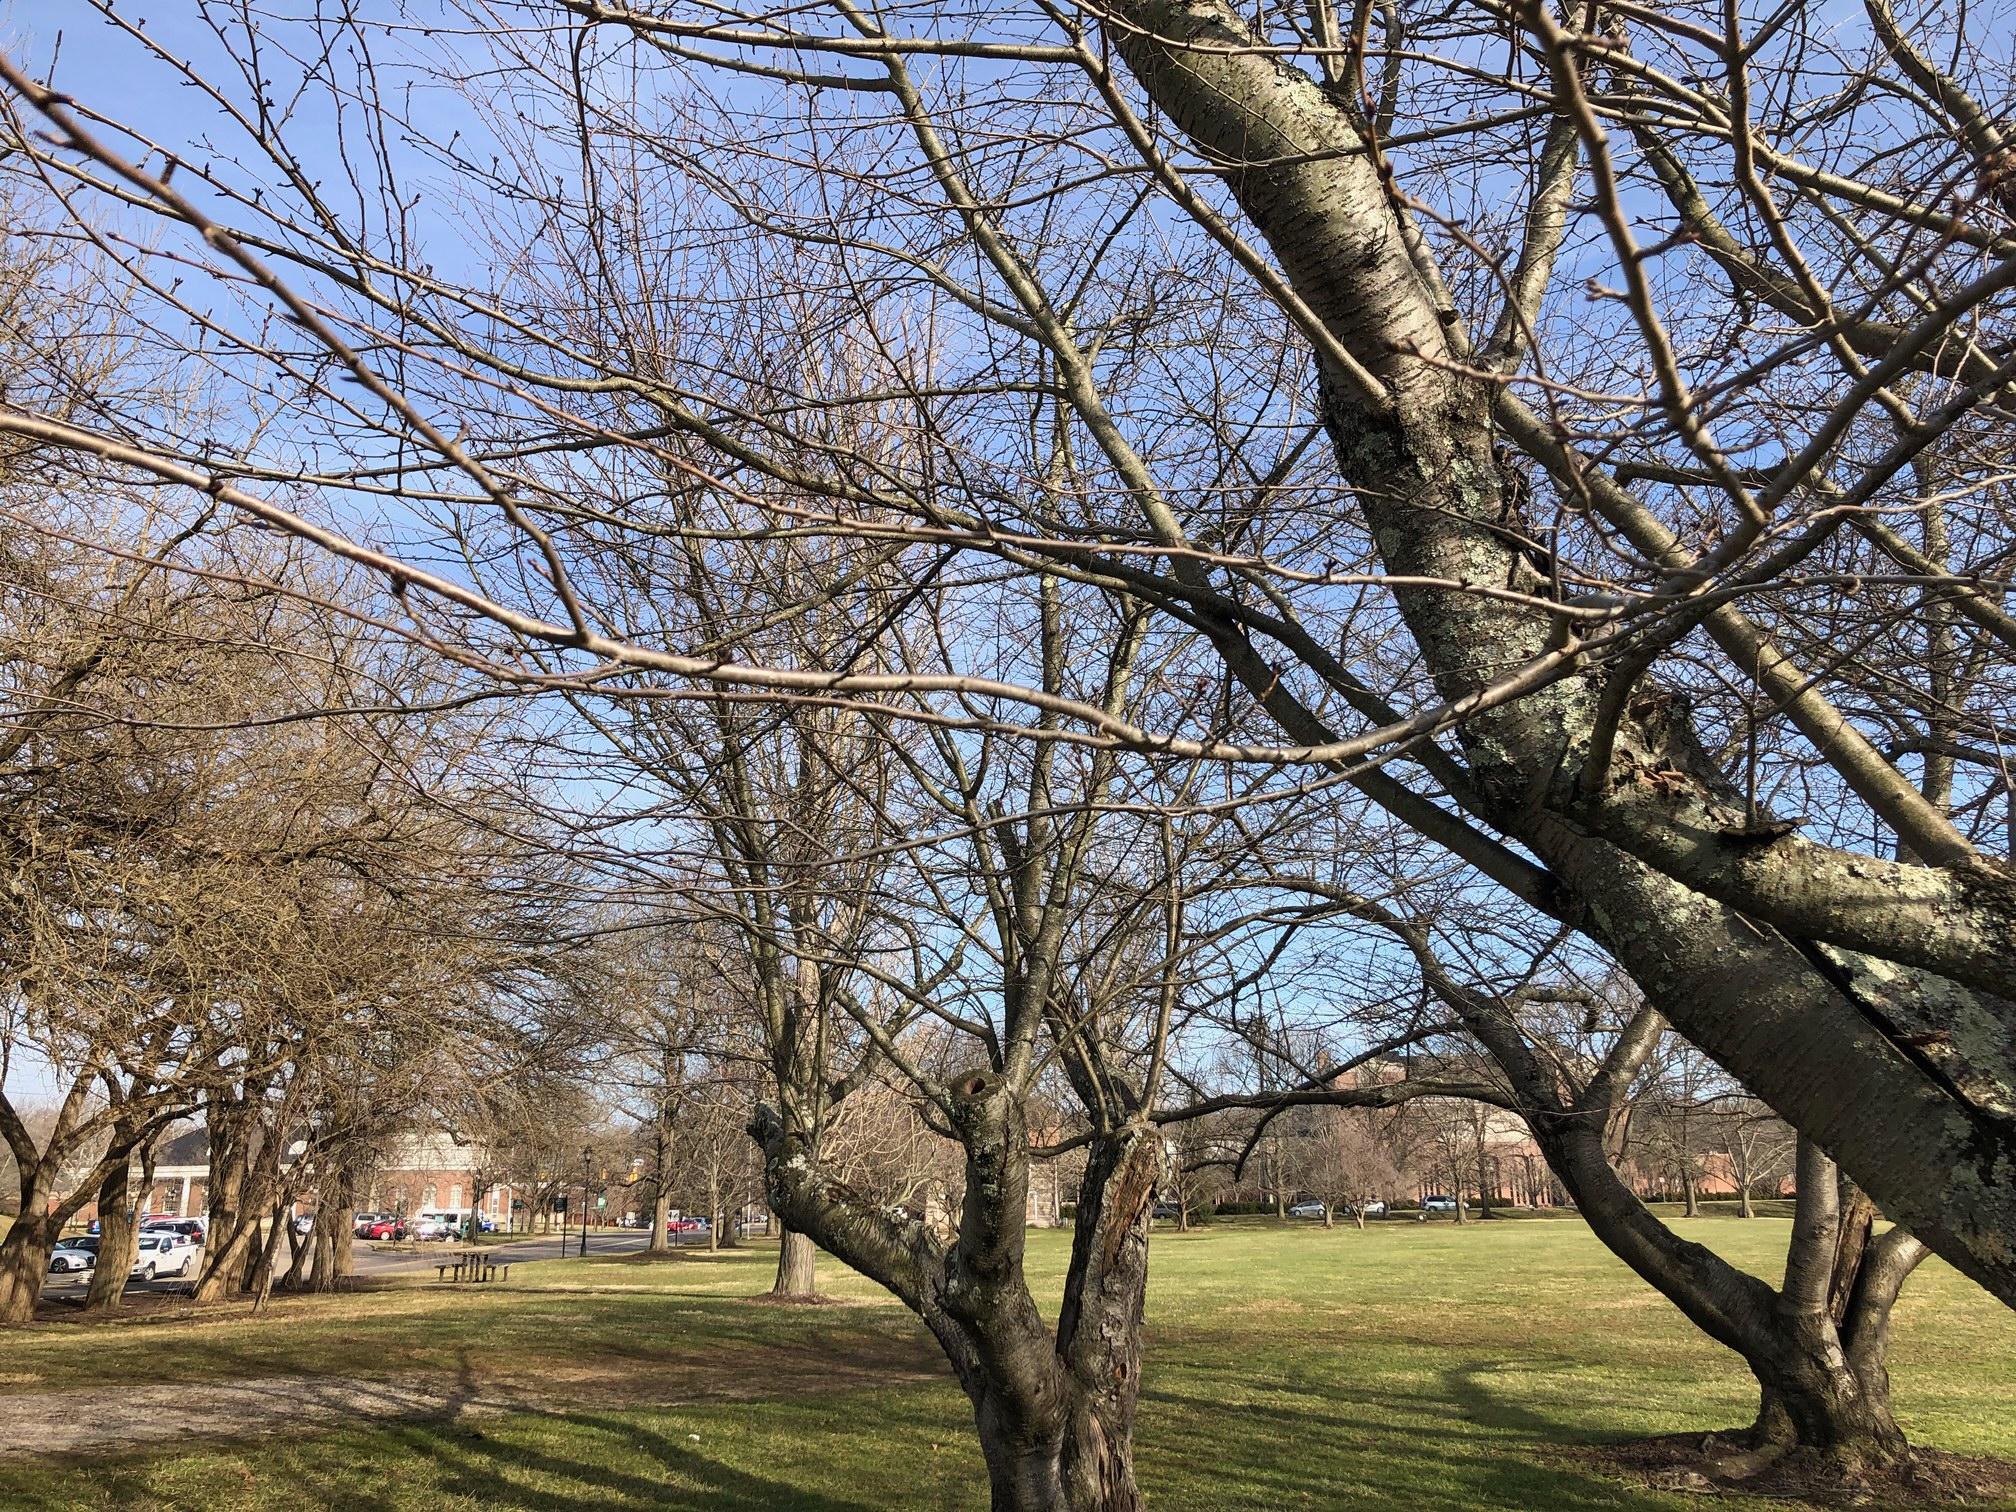 Bare cherry trees on campus with buds starting to form